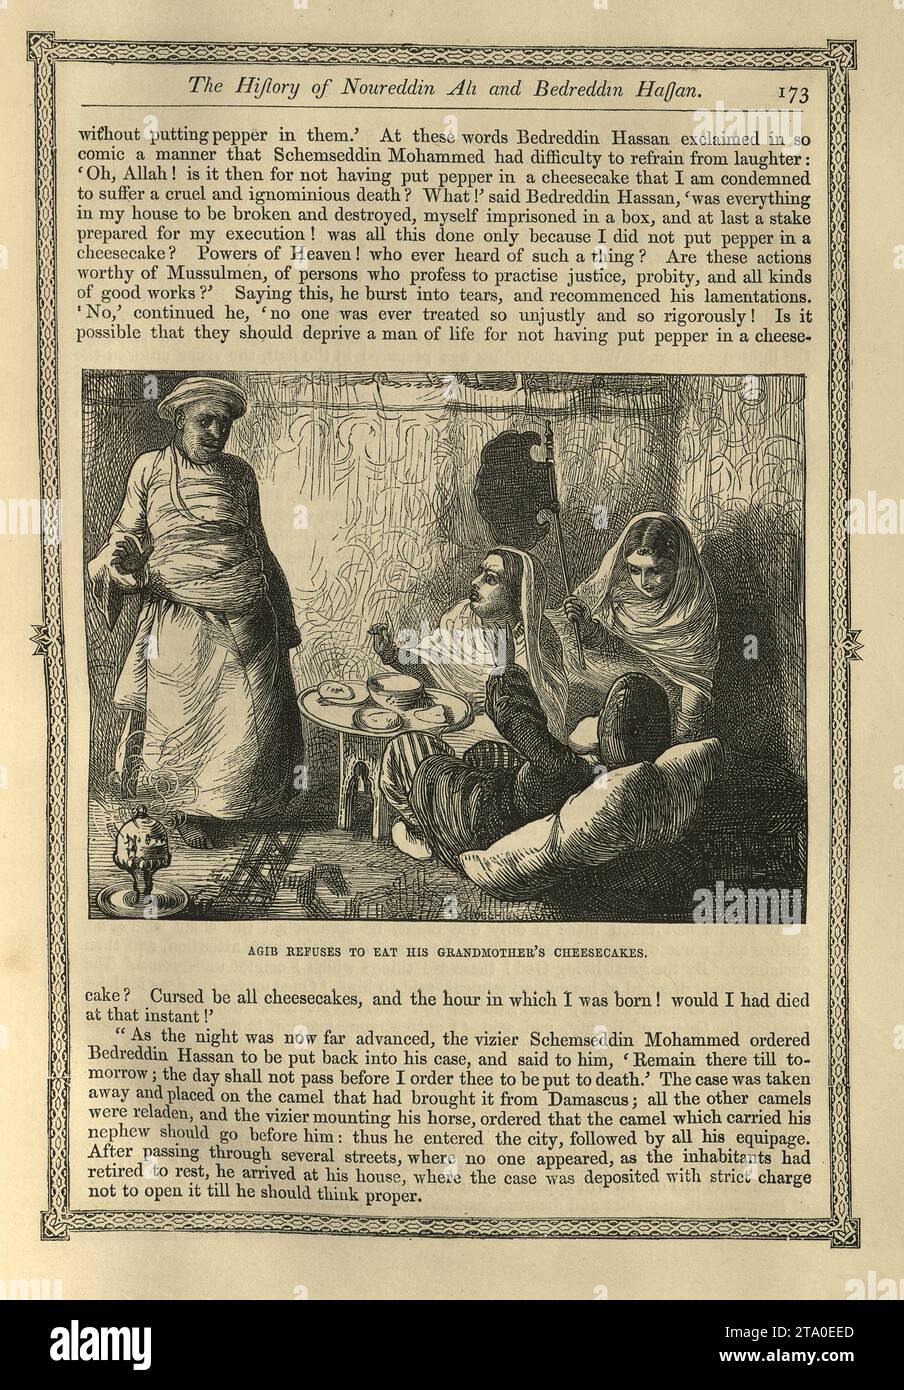 Vintage illustration One Thousand and One Nights, Agib refuses to eat his grandmother's cheesecake, Arabian, Middle Eastern folktales, by The Brothers Dalziel. History of Noureddin Ali and Bedreddin Hassan Stock Photo